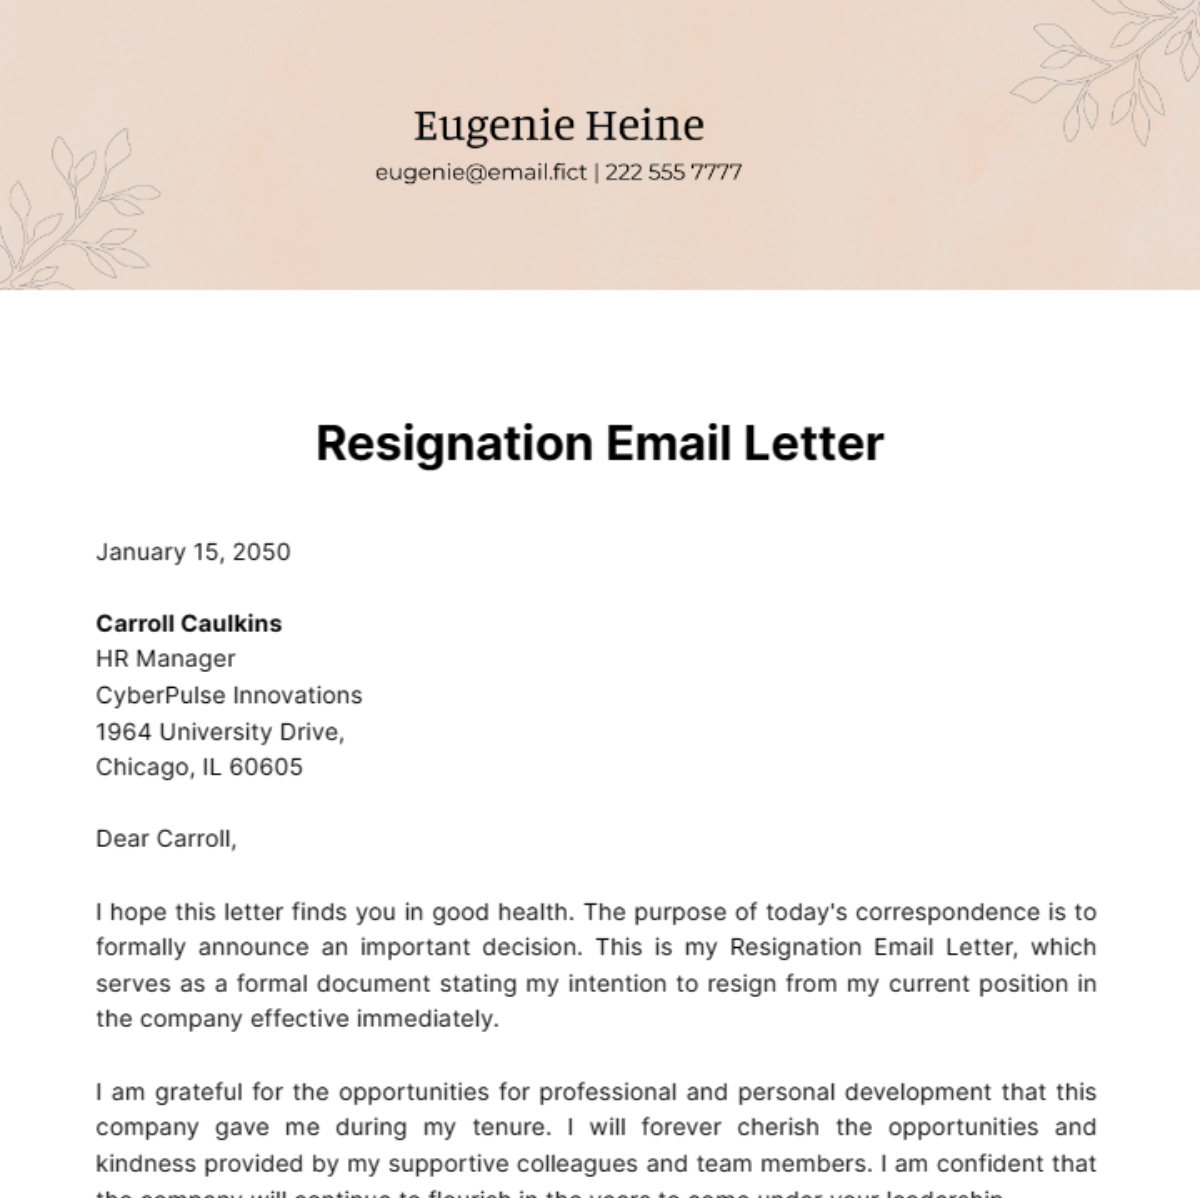 Resignation Email Letter Template